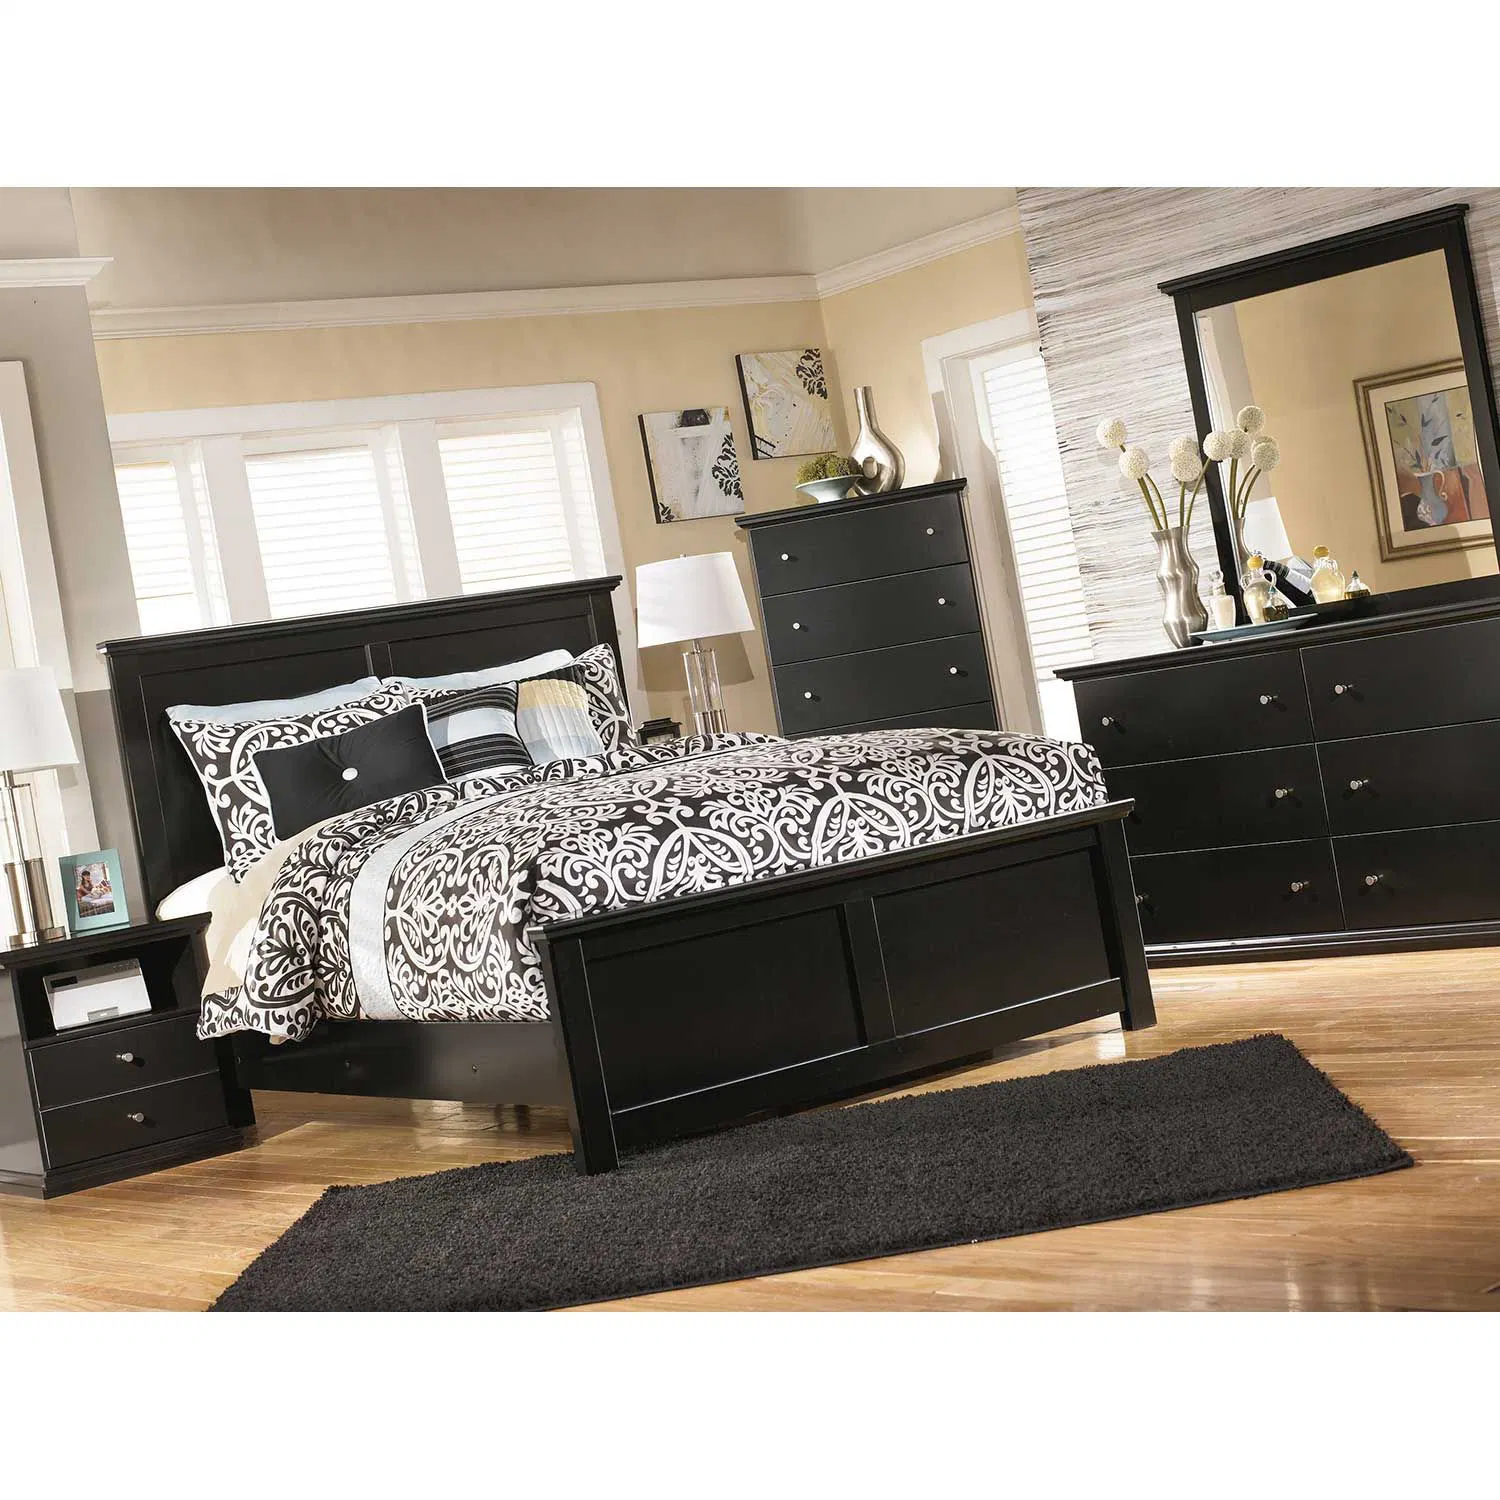 China Wholesale/Supplier Black Painted Wooden 5 Piece Bedroom Set Furniture Include Single Double King Sized Bed Storage Cabinet Making up Vantity Dressing Table